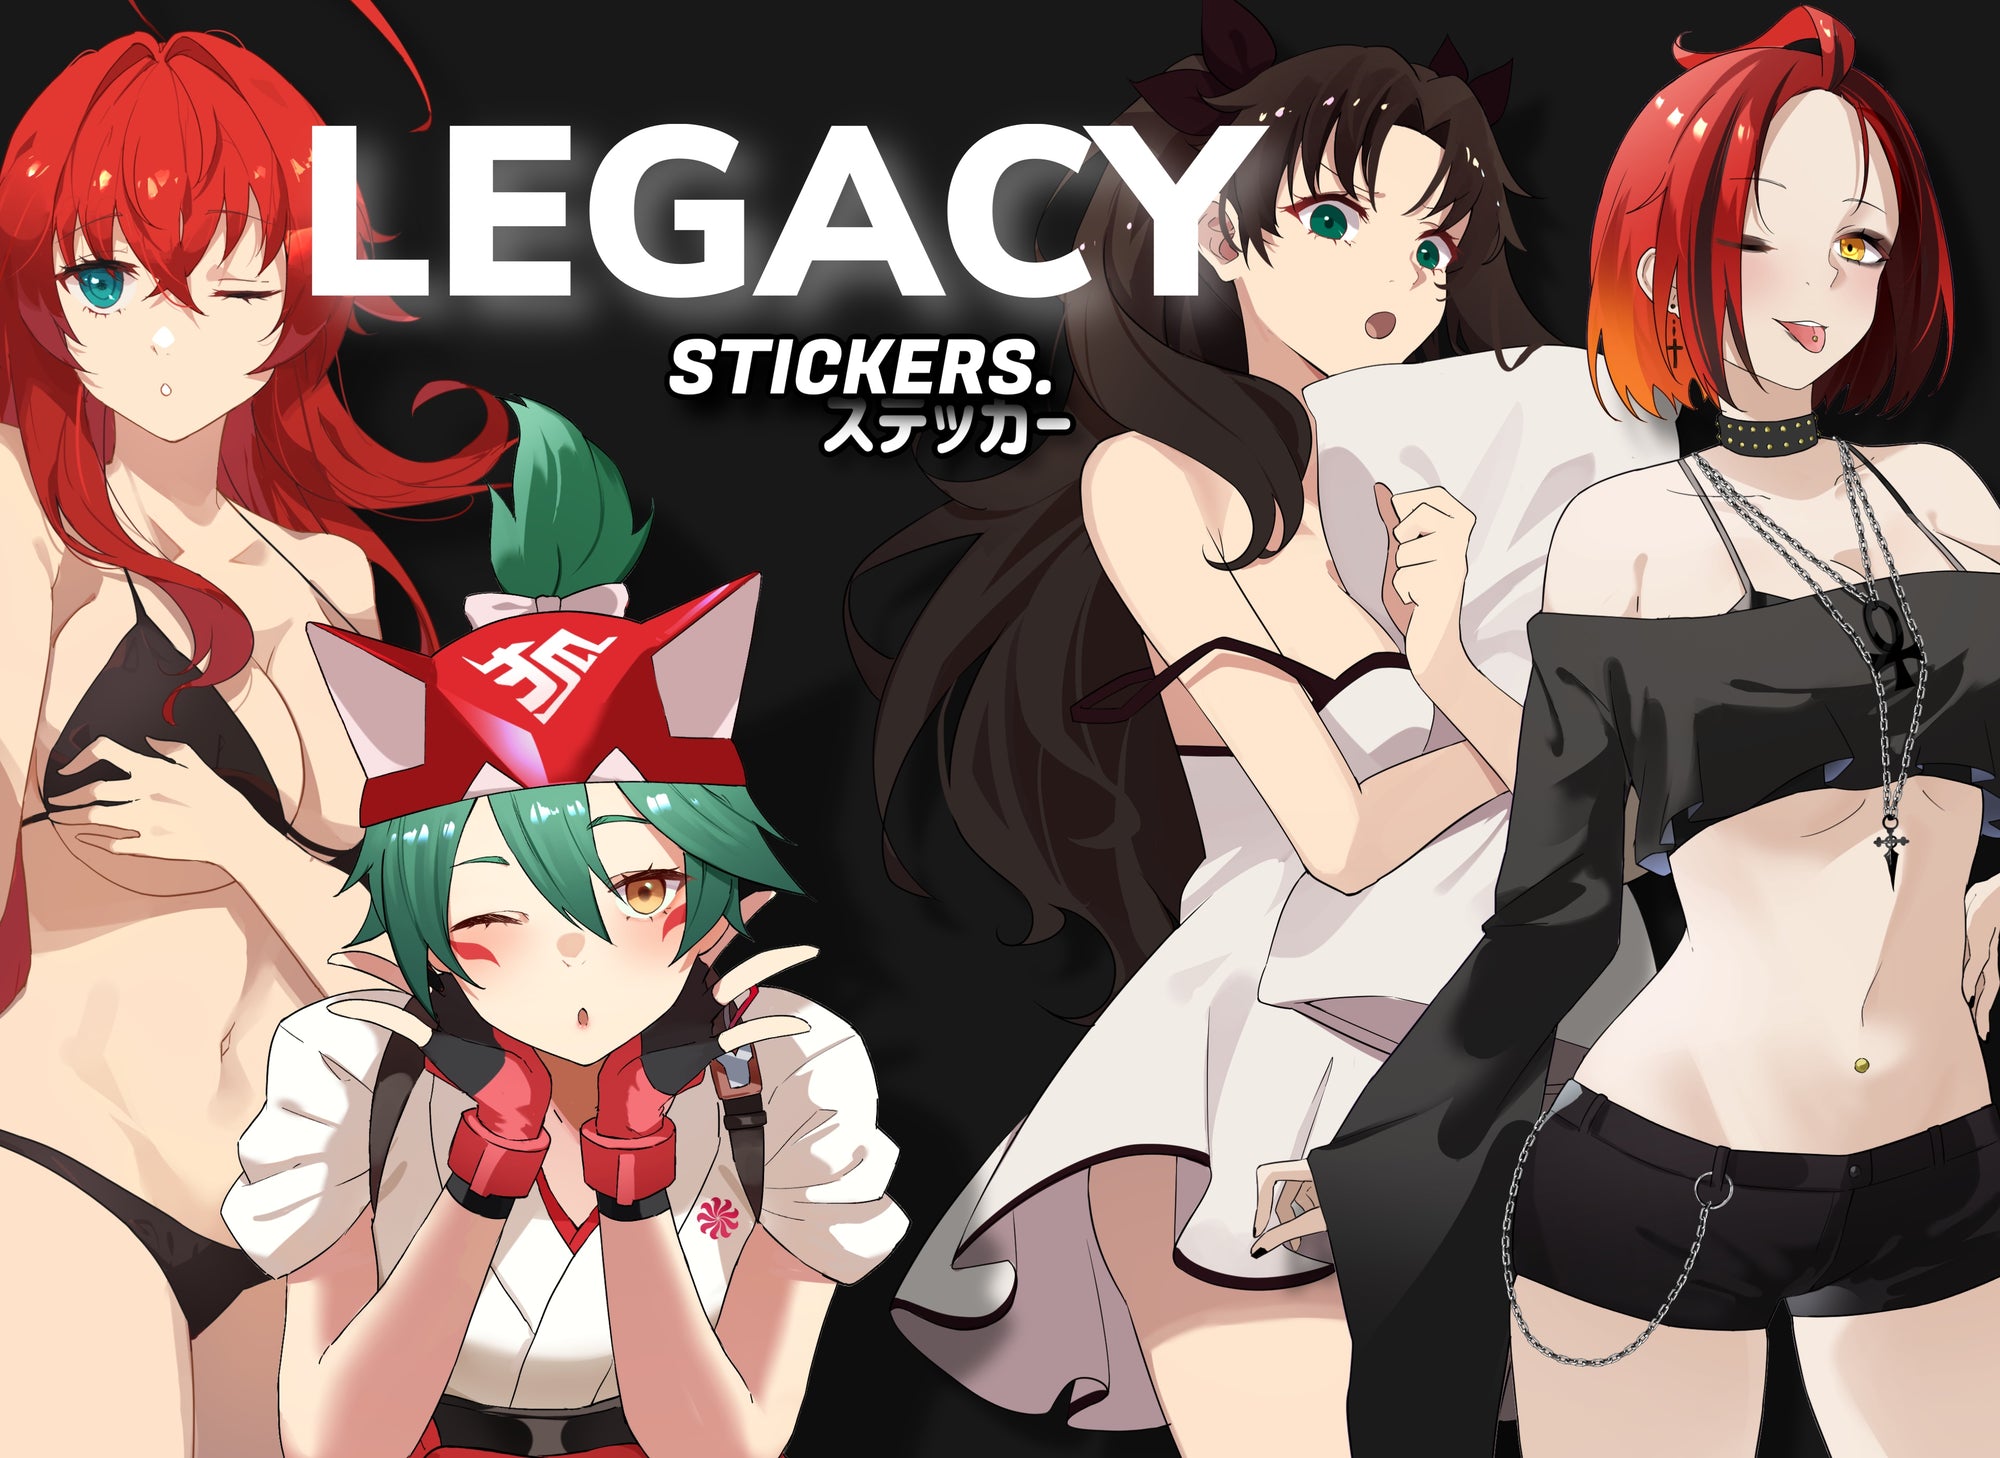 LEGACY STICKERS